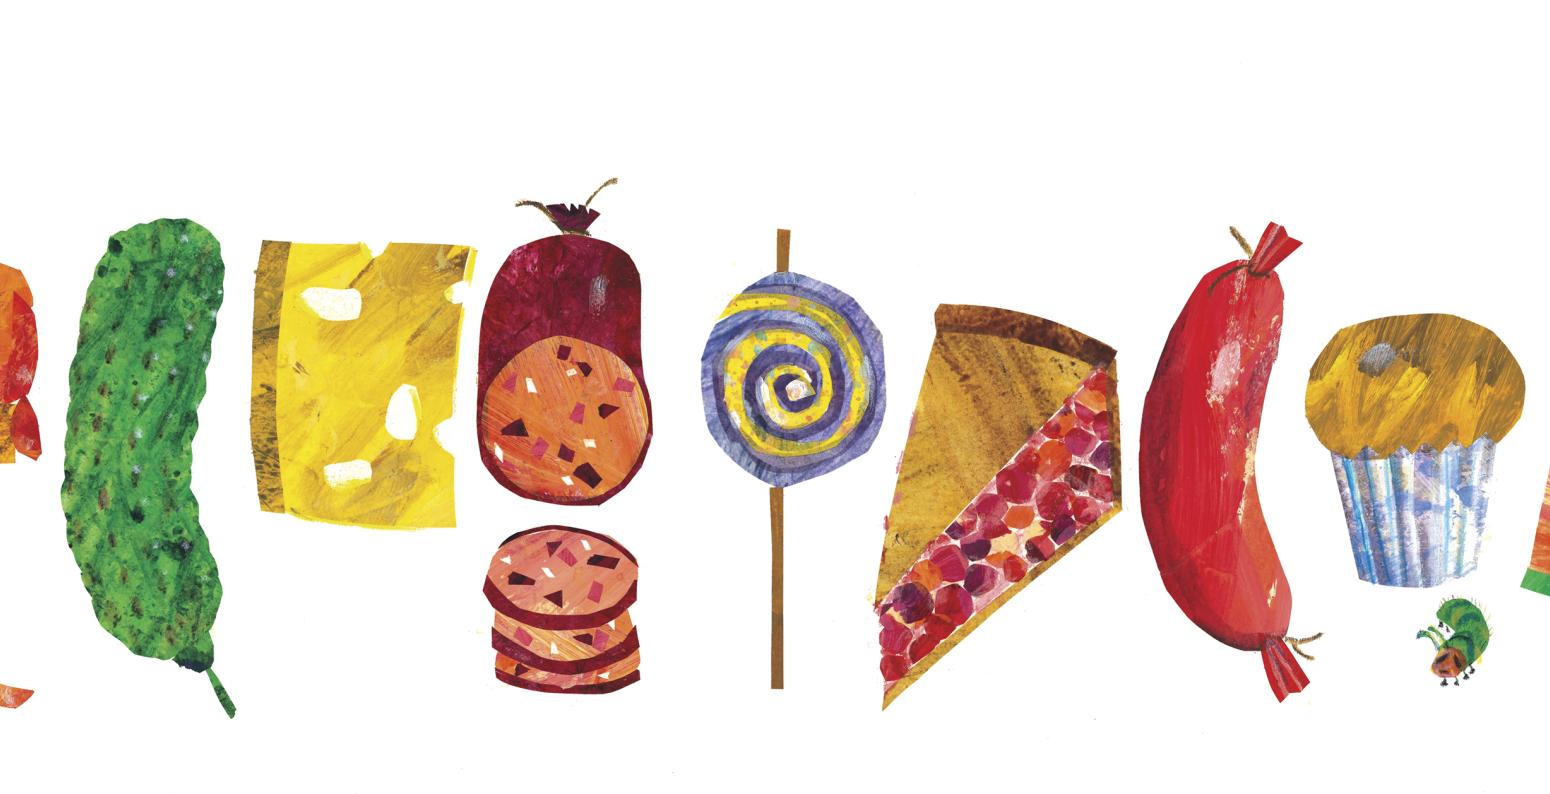 Illustration of party foods. 